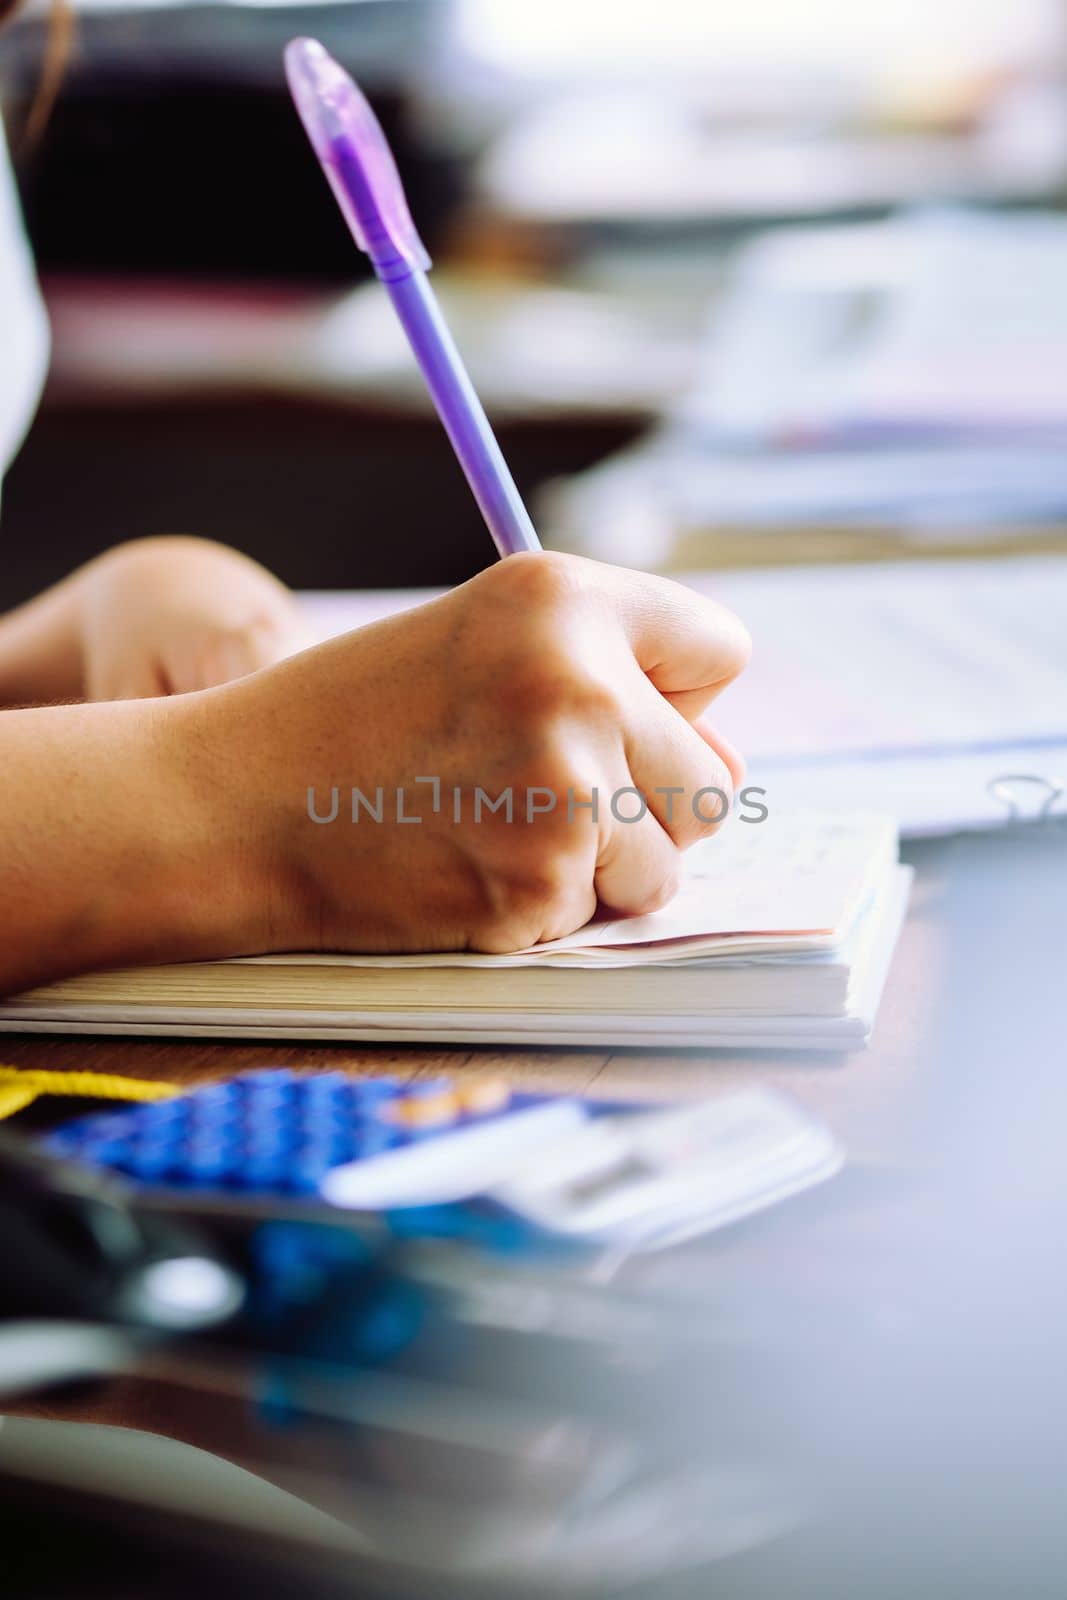 Close up female hands of accountant with calculator and pen. business accounting background.